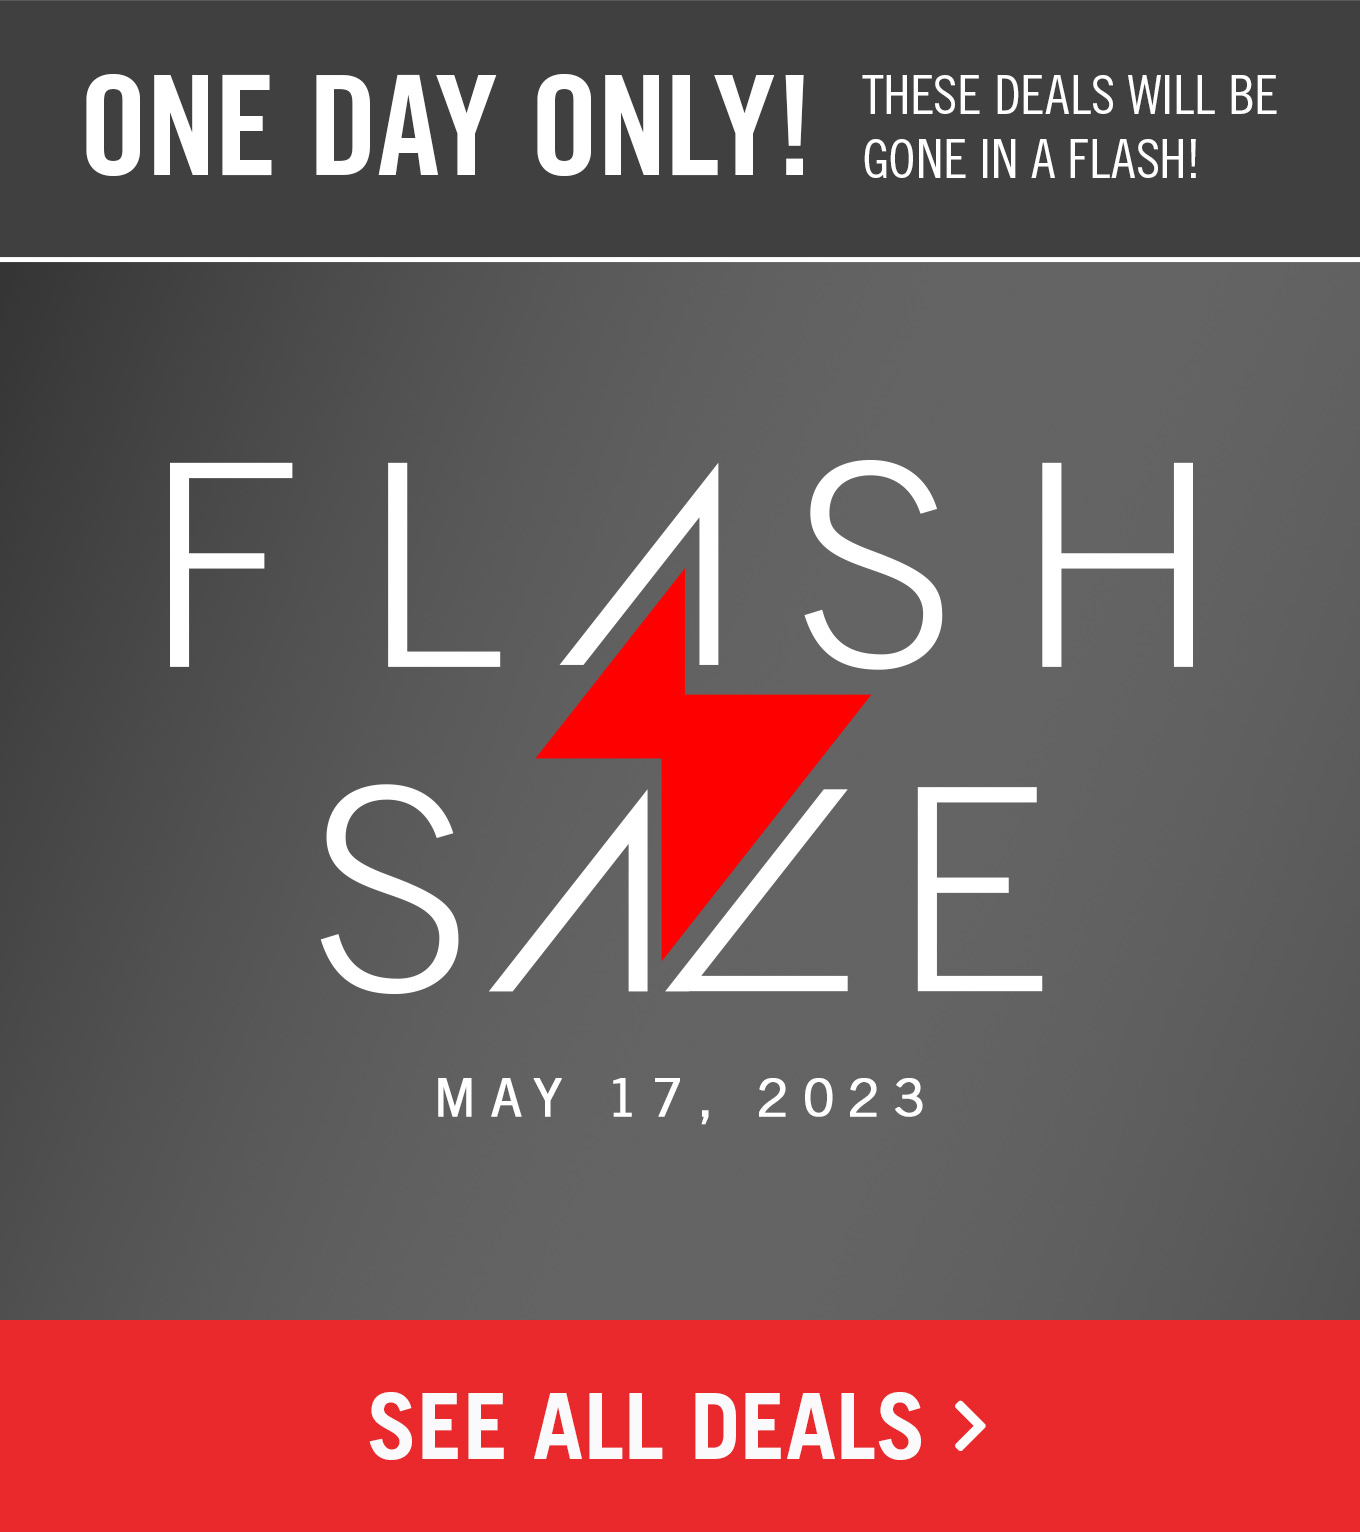 Flash Sale May 17! One day only! See all deals.